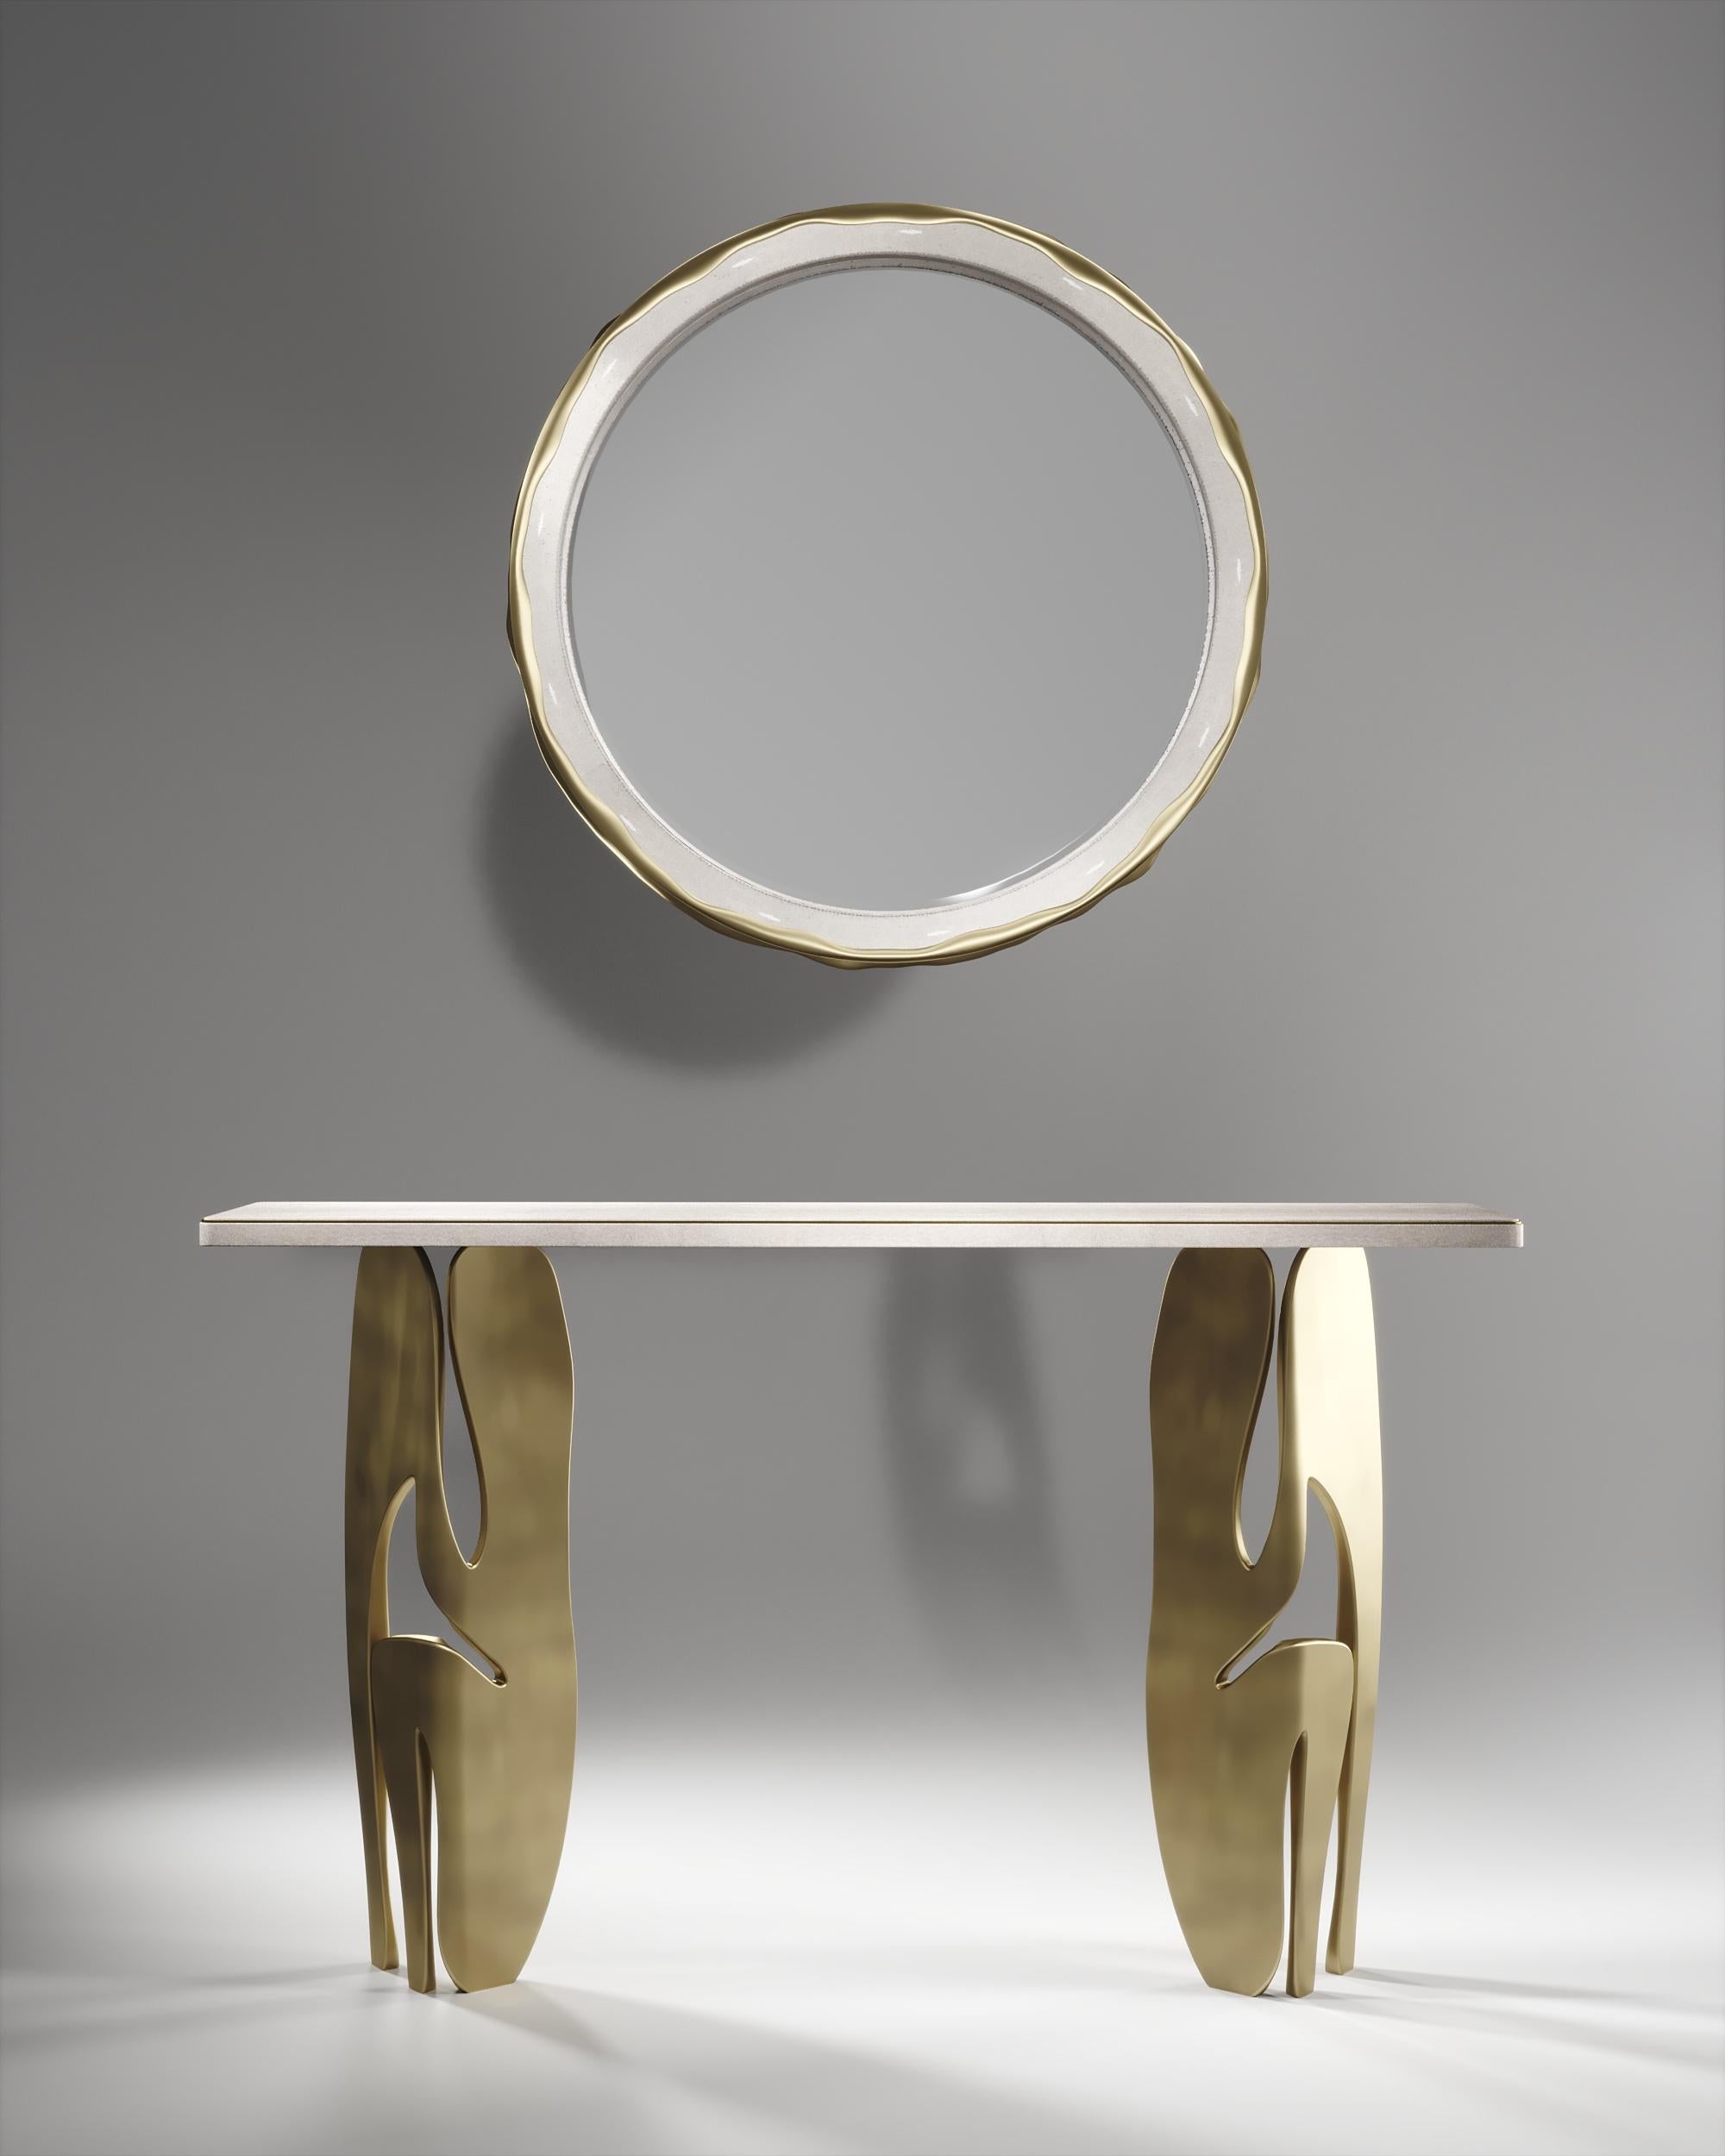 The Melting Mirror by R&Y Augousti in cream shagreen and bronze-patina brass, is an iconic piece of theirs with their signature 